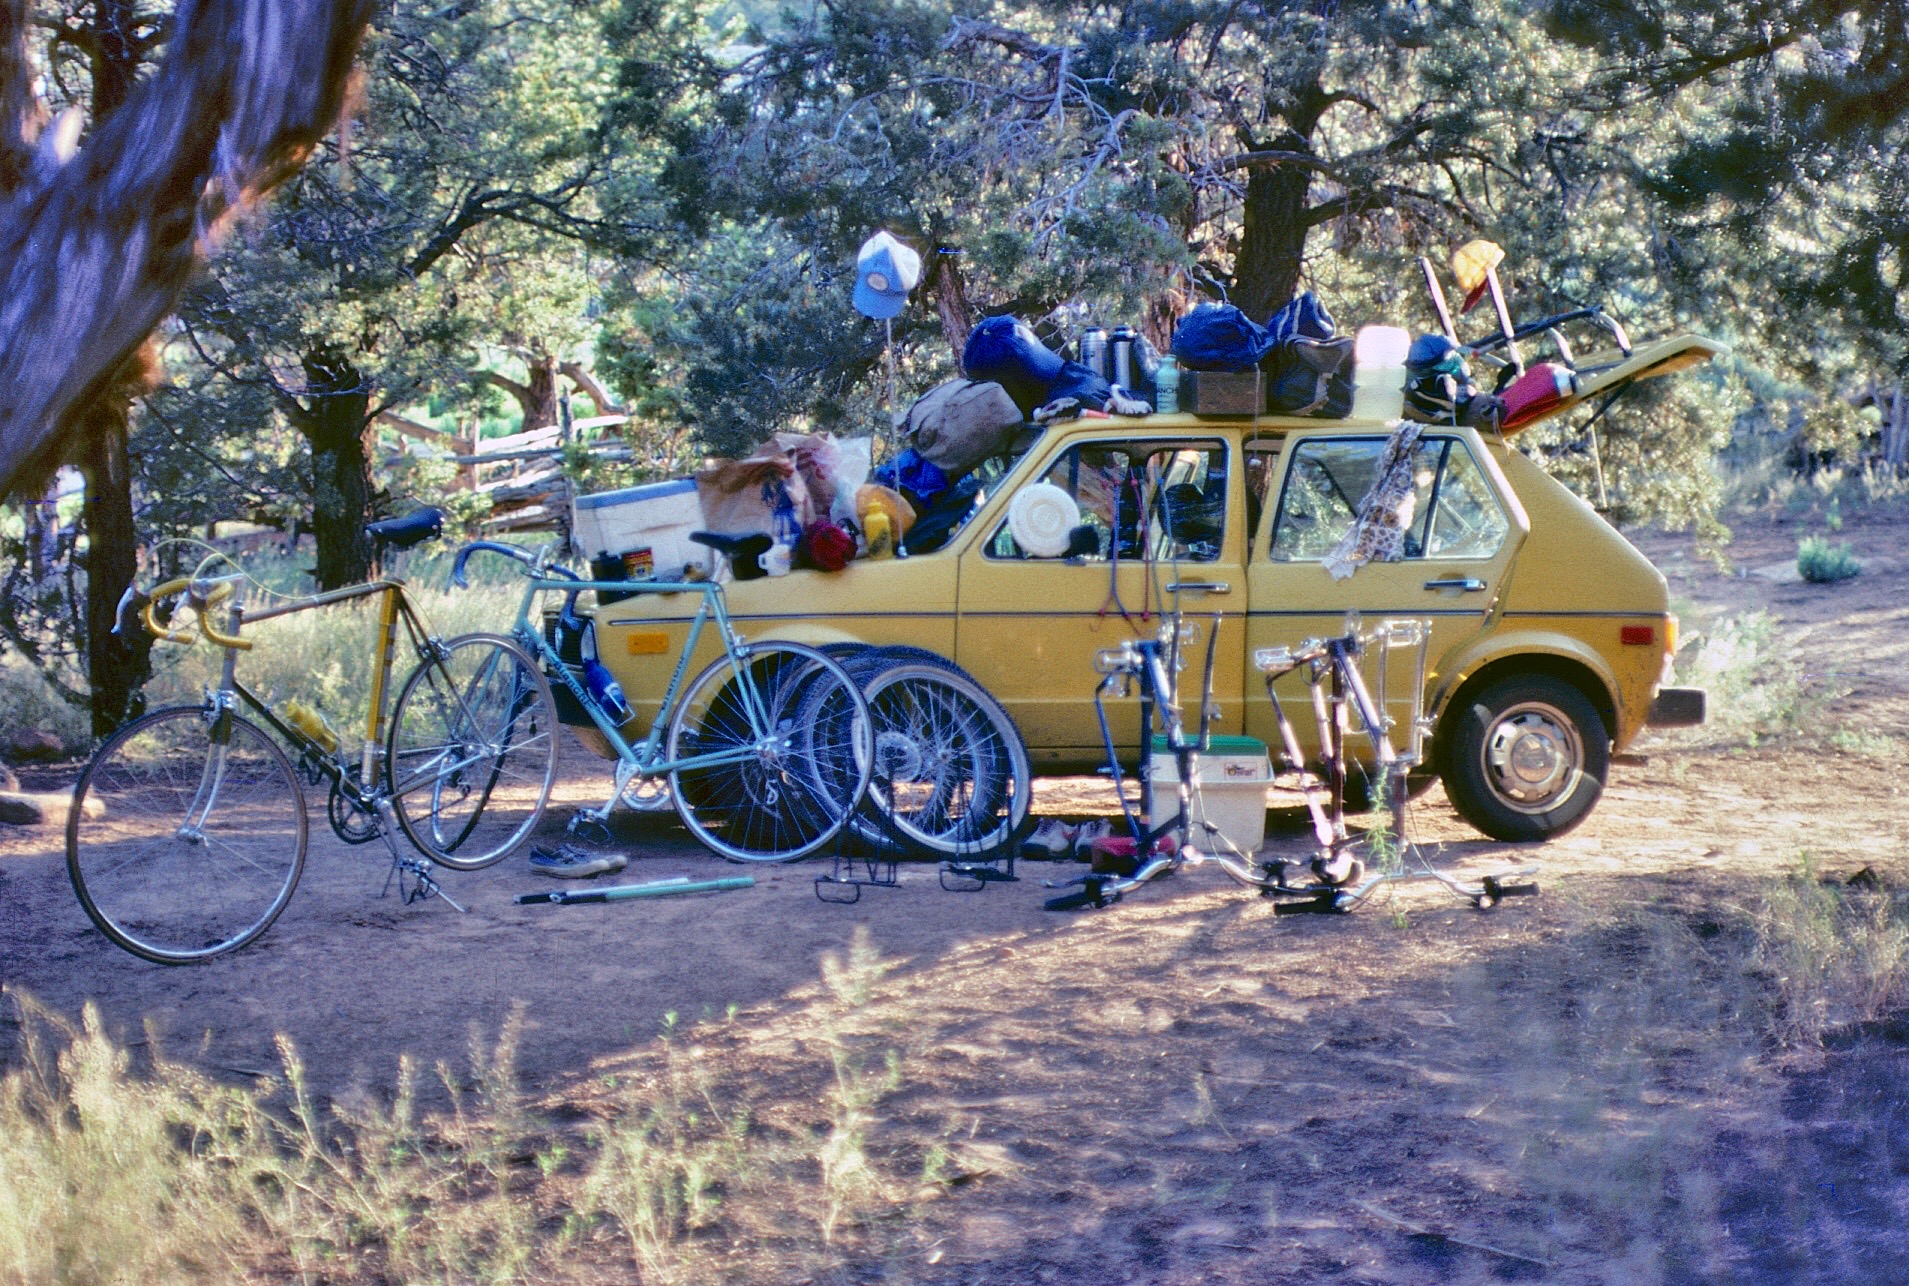 Car loaded with bikes and gear